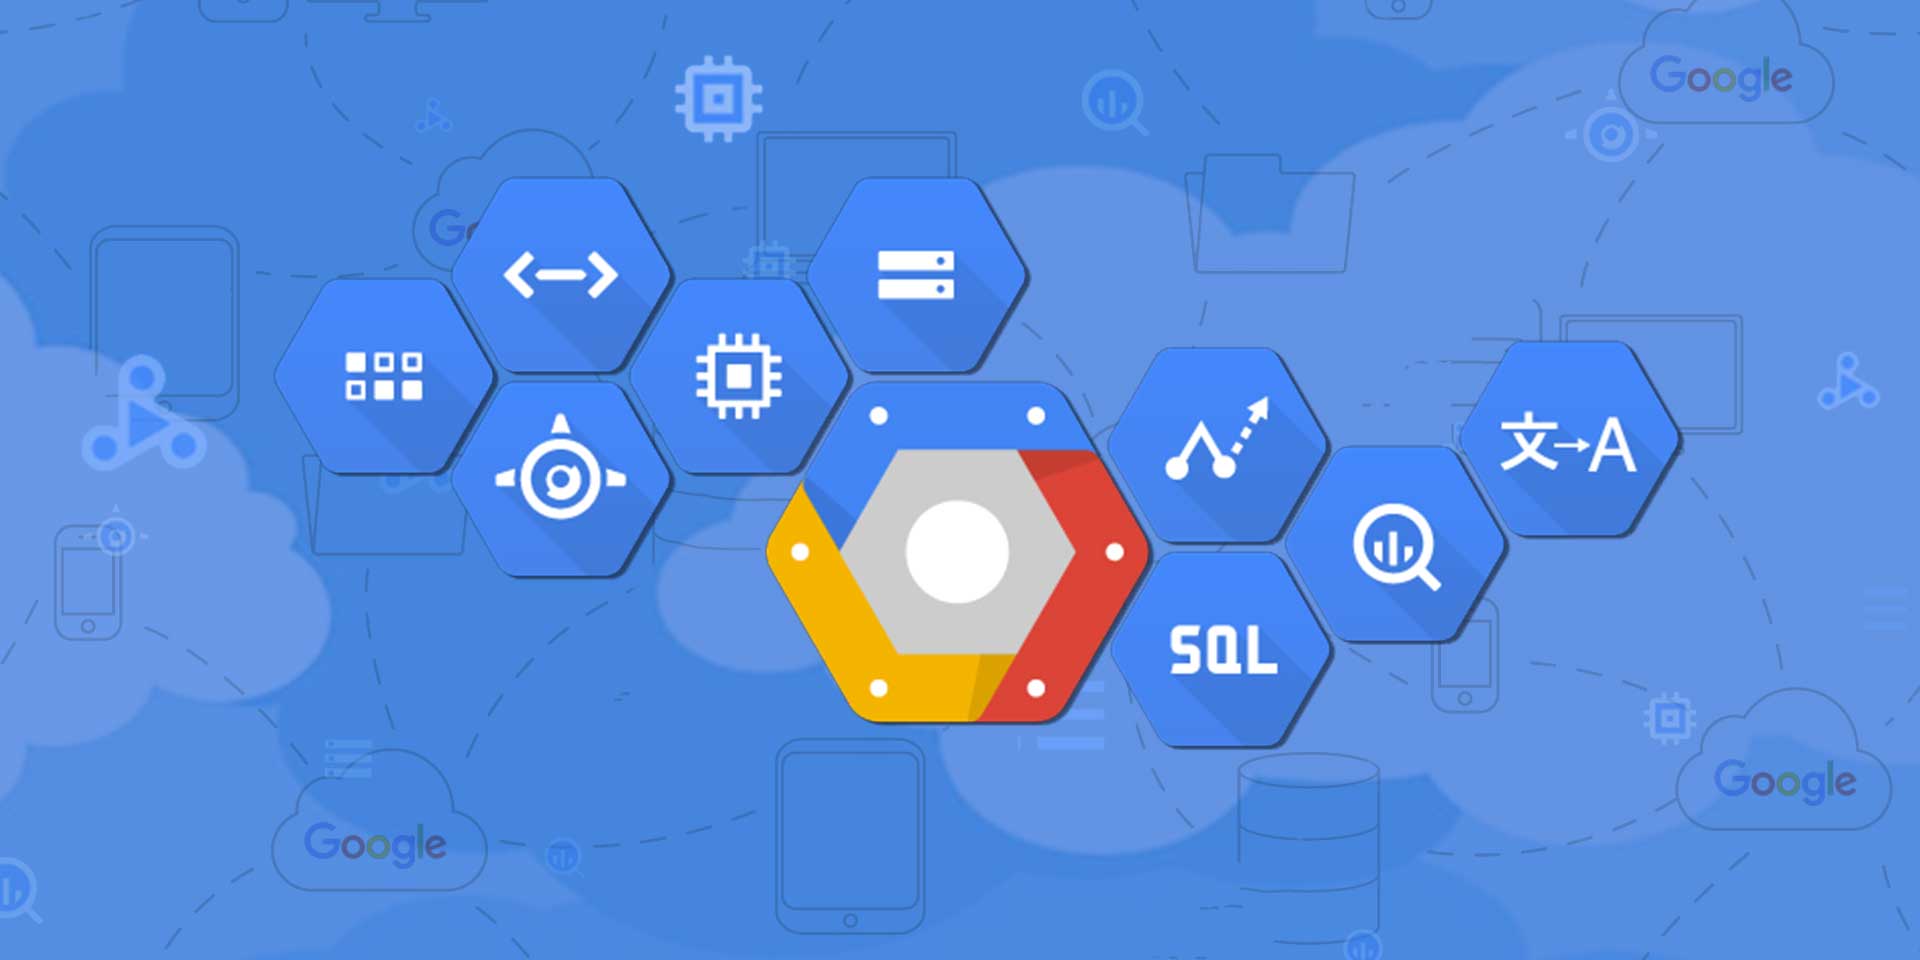 late to the party, google's cloud leans on machine learning and ai to capture enterprise market | factordaily